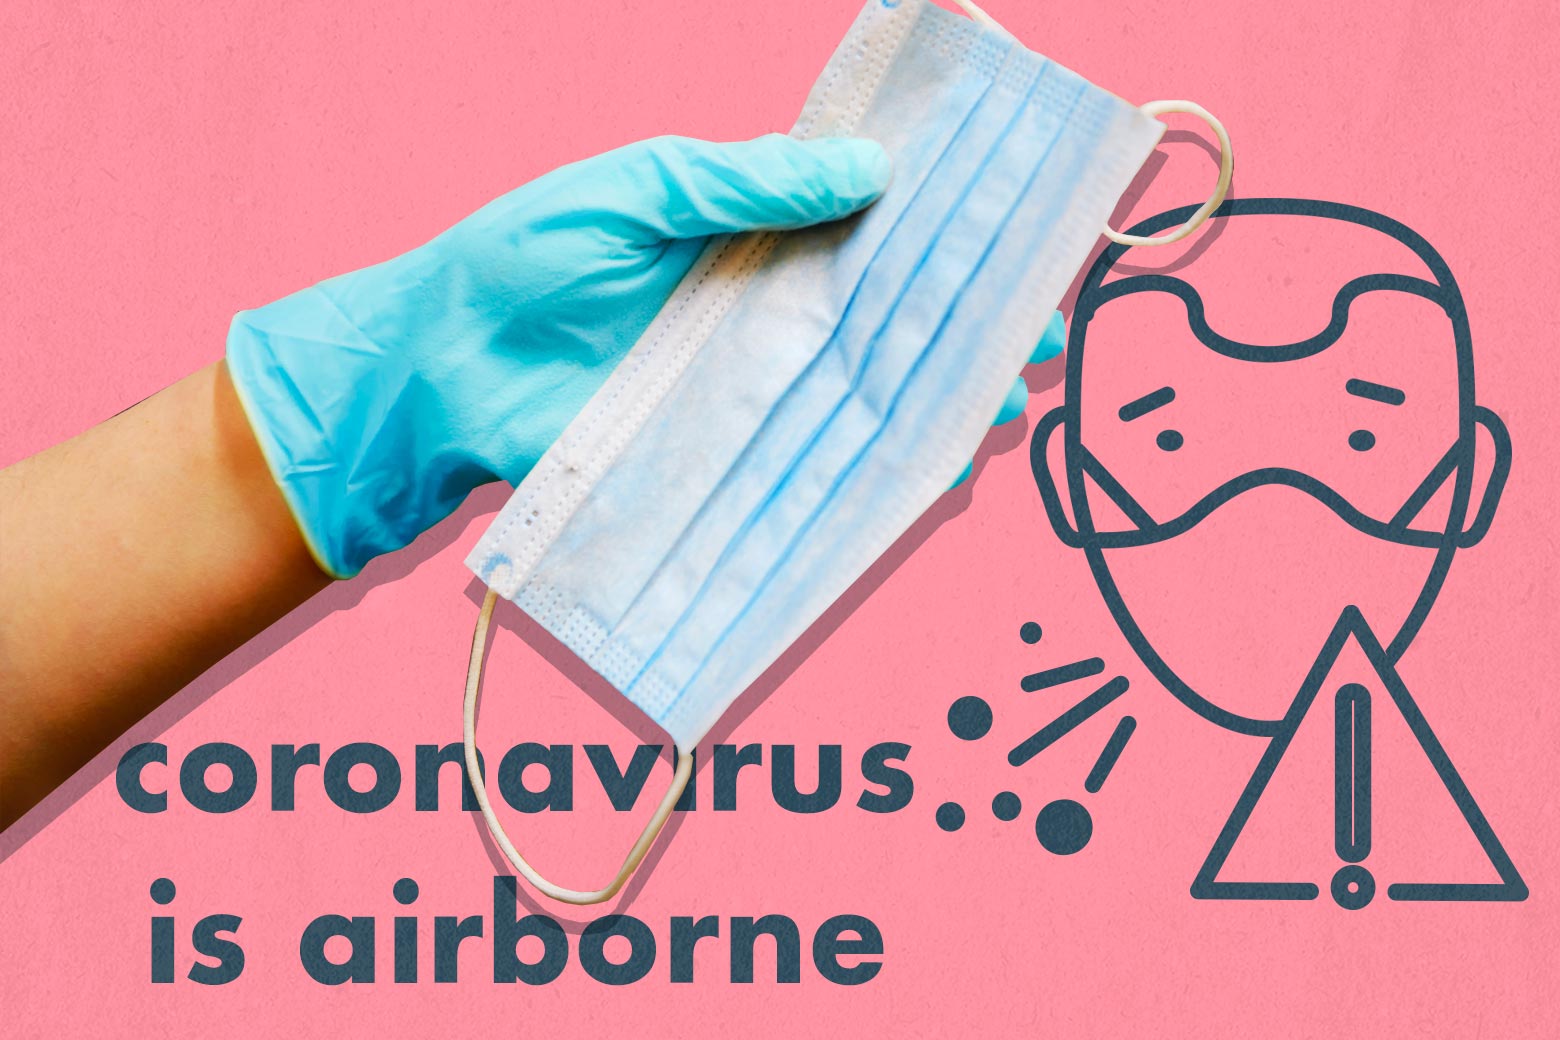 A sign that says "coronavirus is airborne" and shows a drawing of a man wearing a face mask and sneezing, beside a warning sign. To the left, a gloved hand holds a face mask.